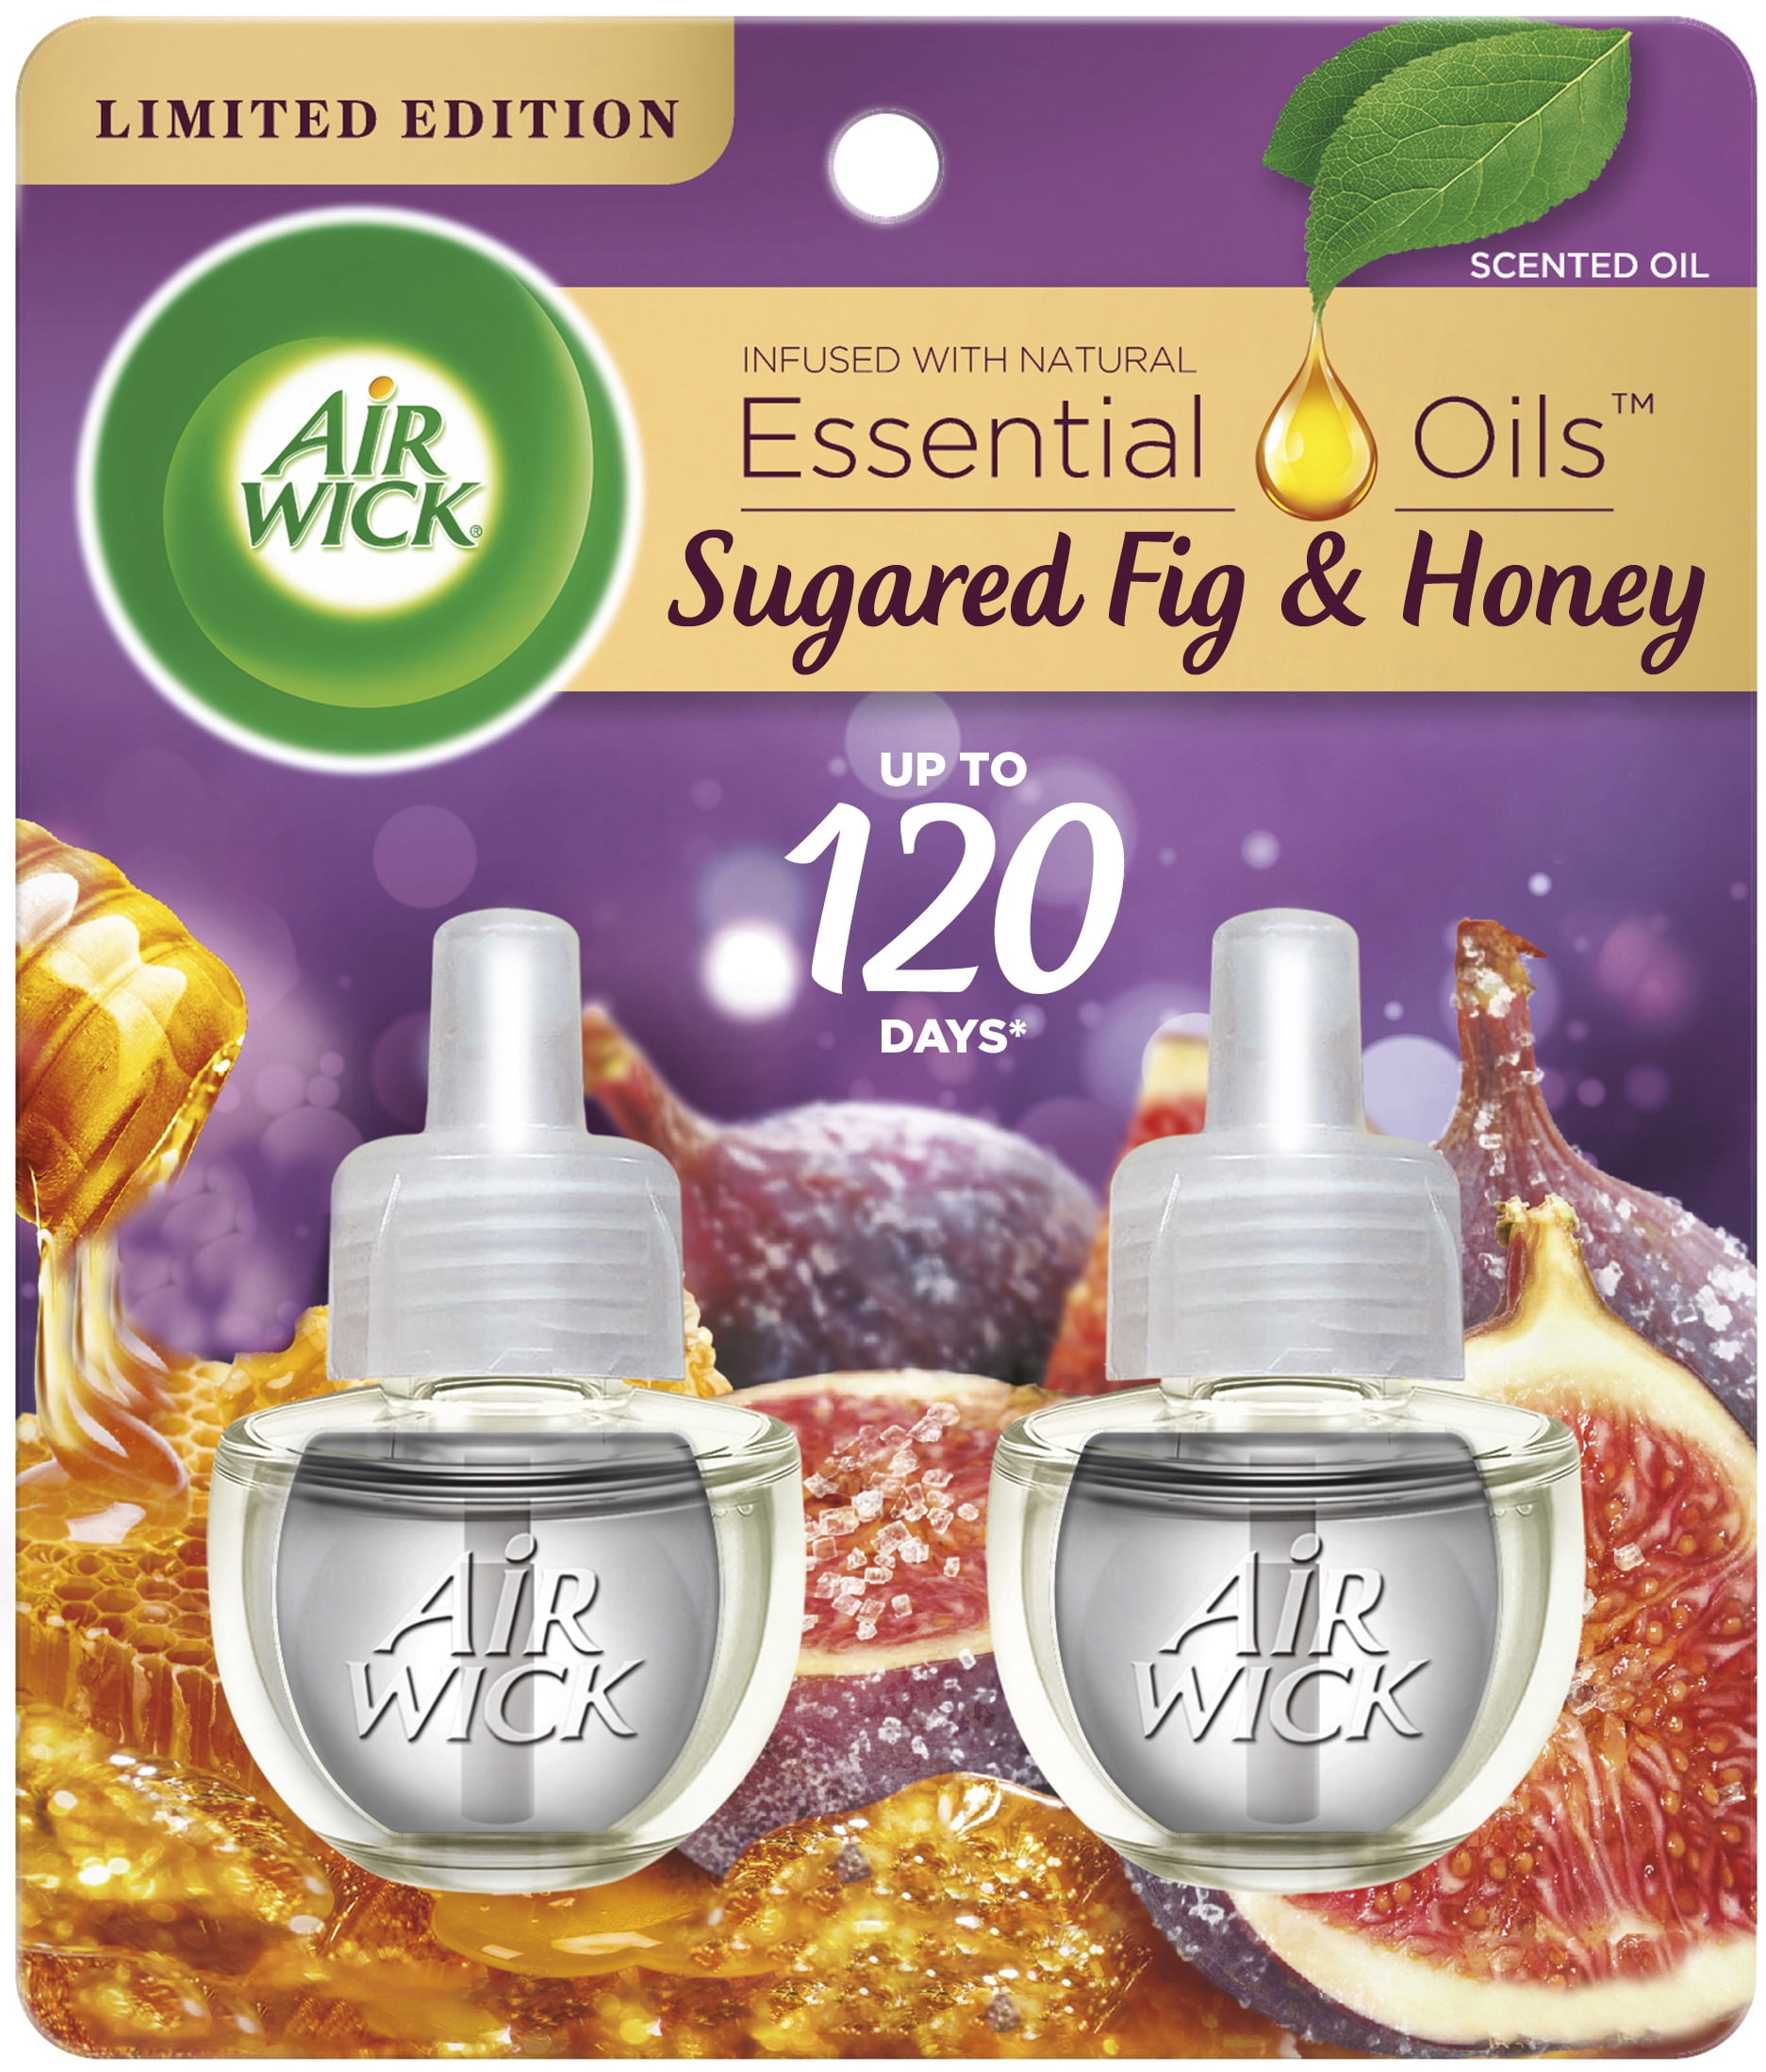 Air Wick Vibrant Plug in Scented Oil Refill, 2ct, Warm Spiced